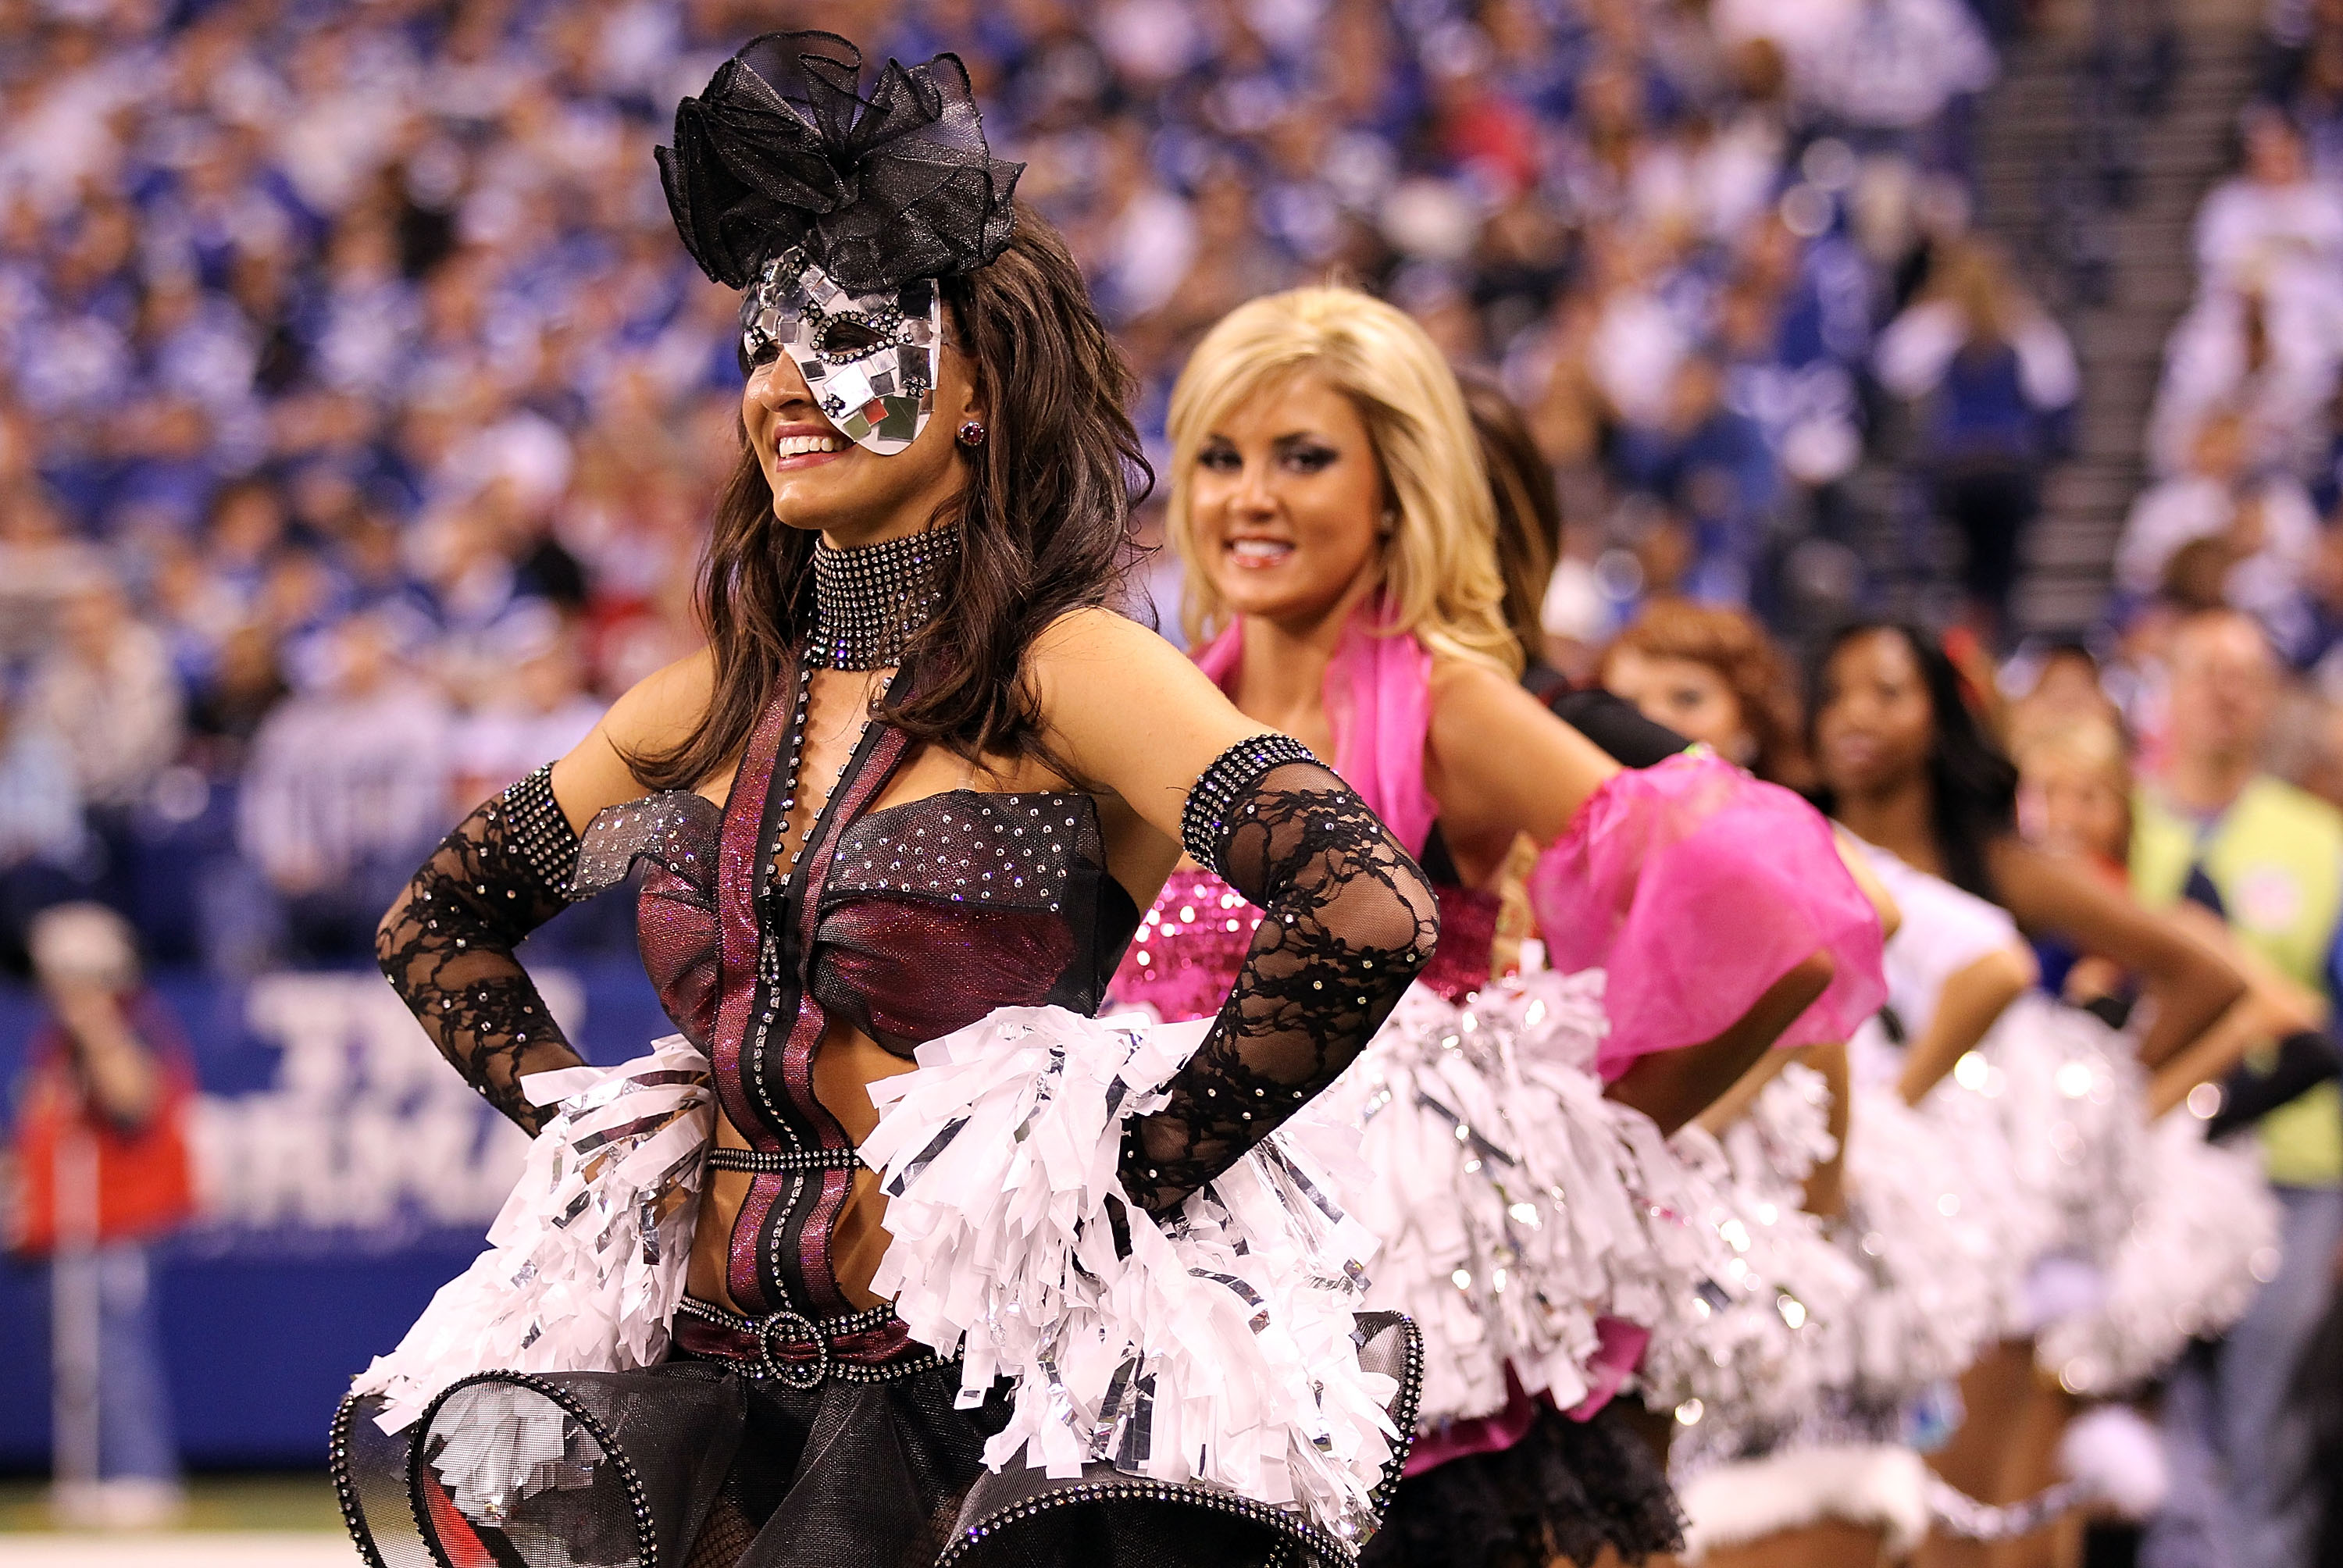 INDIANAPOLIS - NOVEMBER 01:   Indianapolis Colts cheerleaders perform during the NFL game against the Houston Texans  at Lucas Oil Stadium on November 1, 2010 in Indianapolis, Indiana.  (Photo by Andy Lyons/Getty Images)